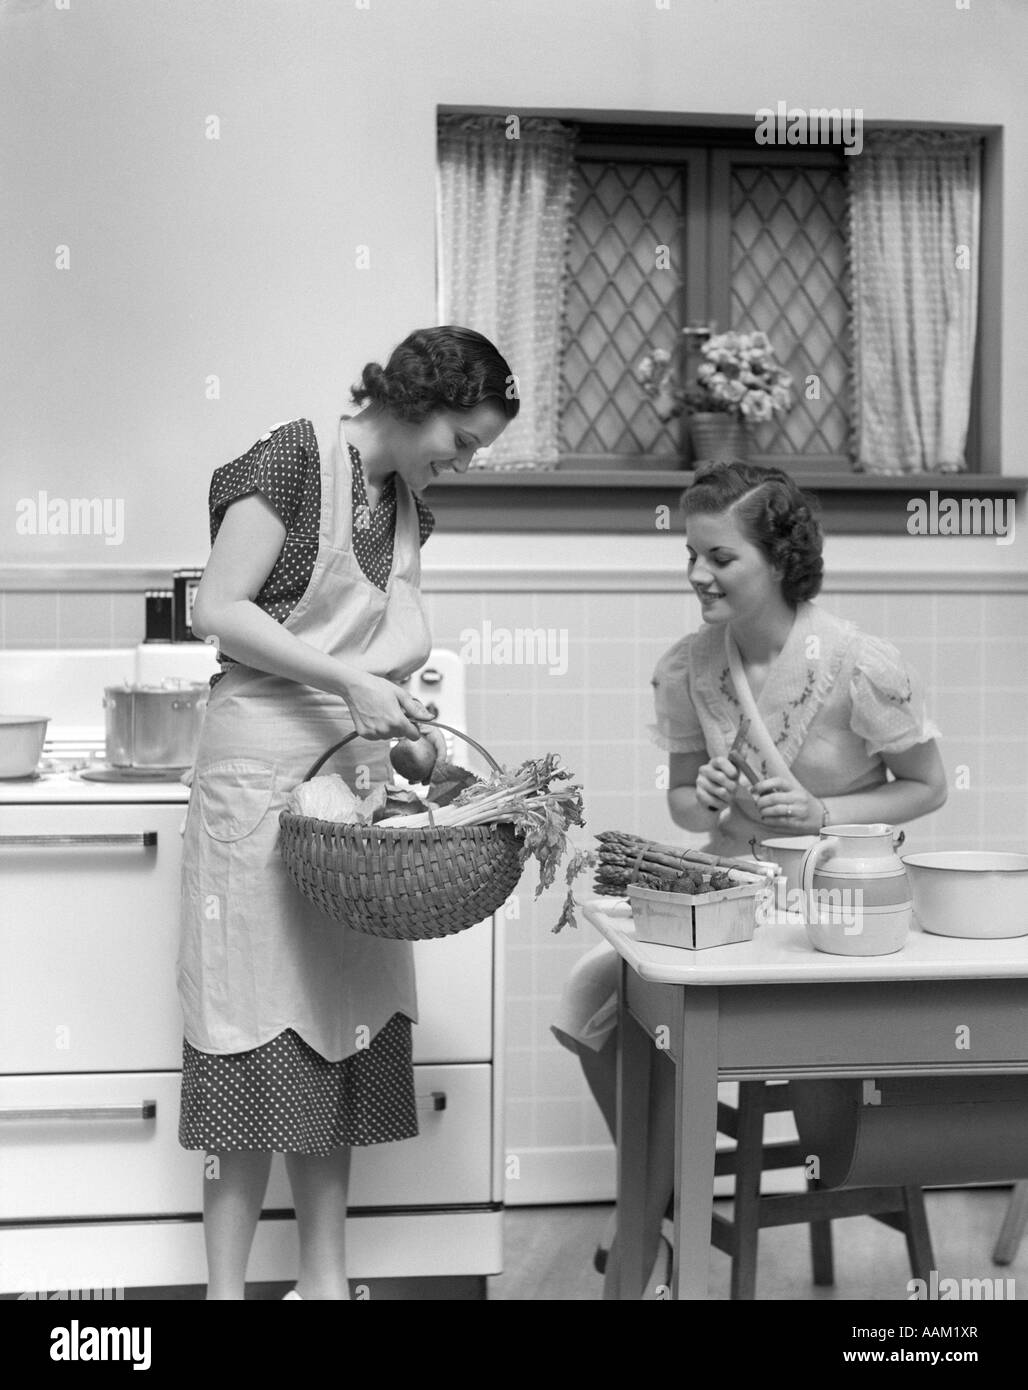 1930s 1940s TWO WOMEN AT KITCHEN TABLE WITH A BASKET OF VEGETABLES ASPARAGUS STOVE Stock Photo